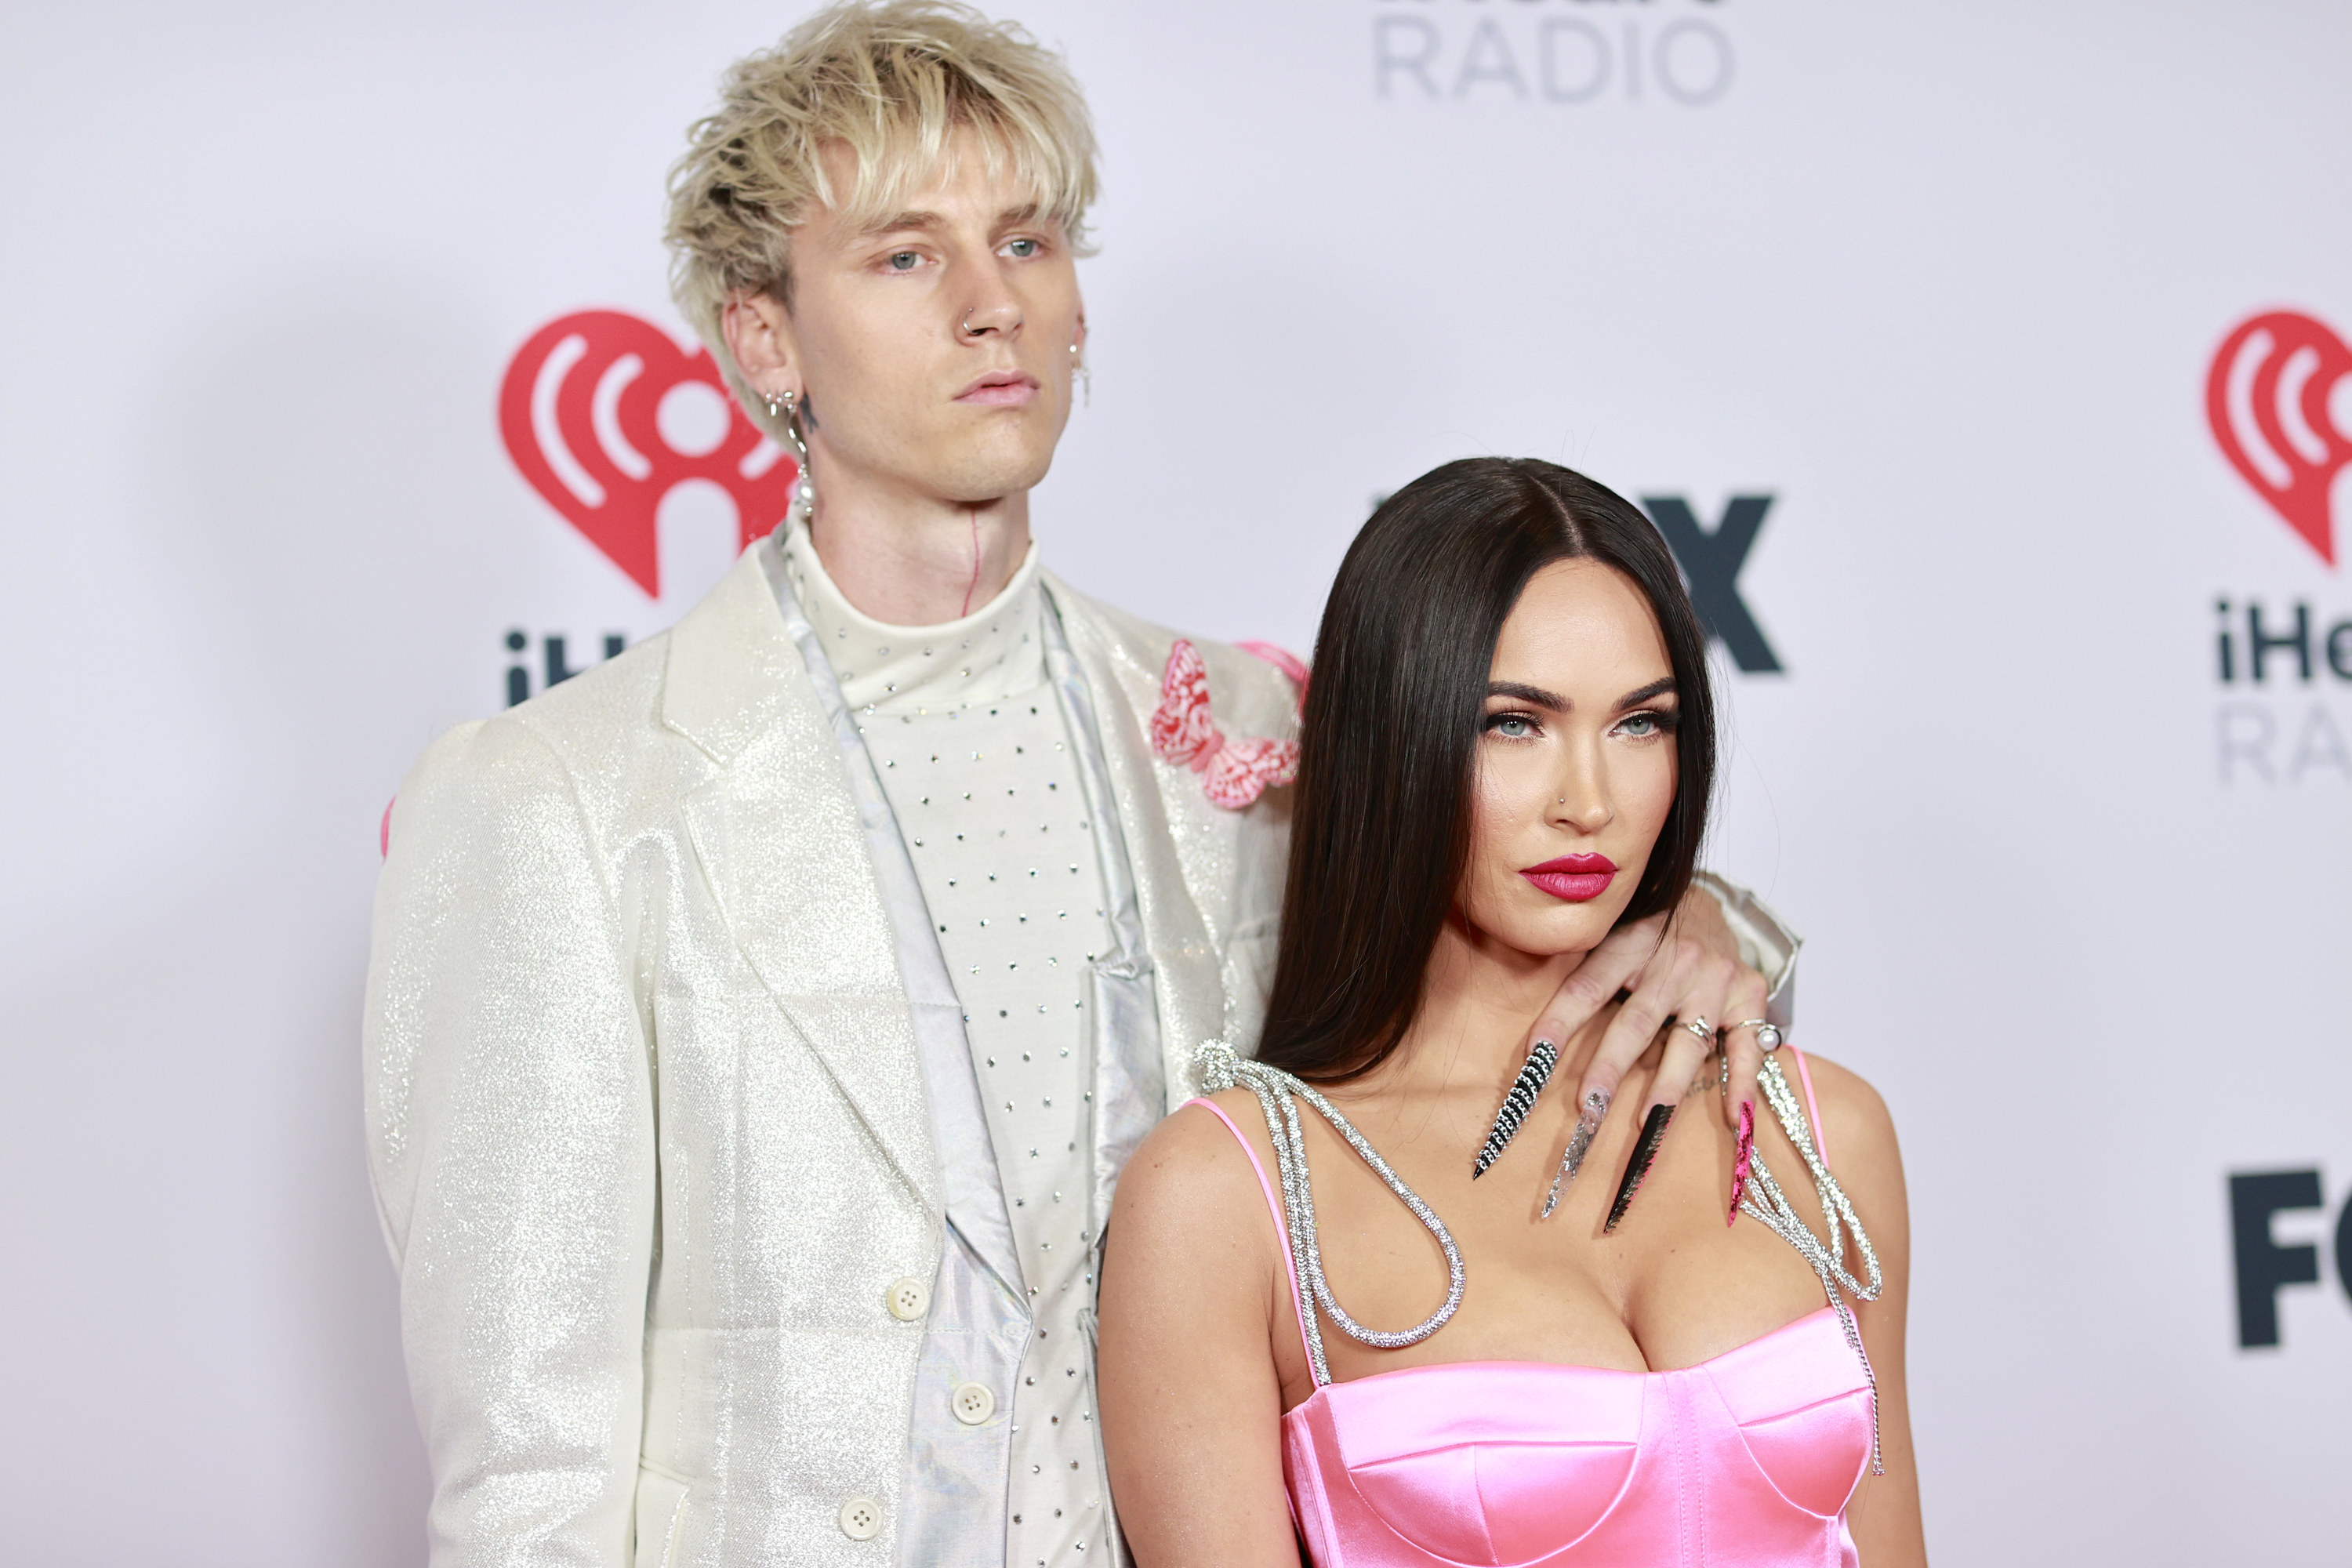 MGK with his arm around Megan as they pose on the red carpet for an I heart radio event